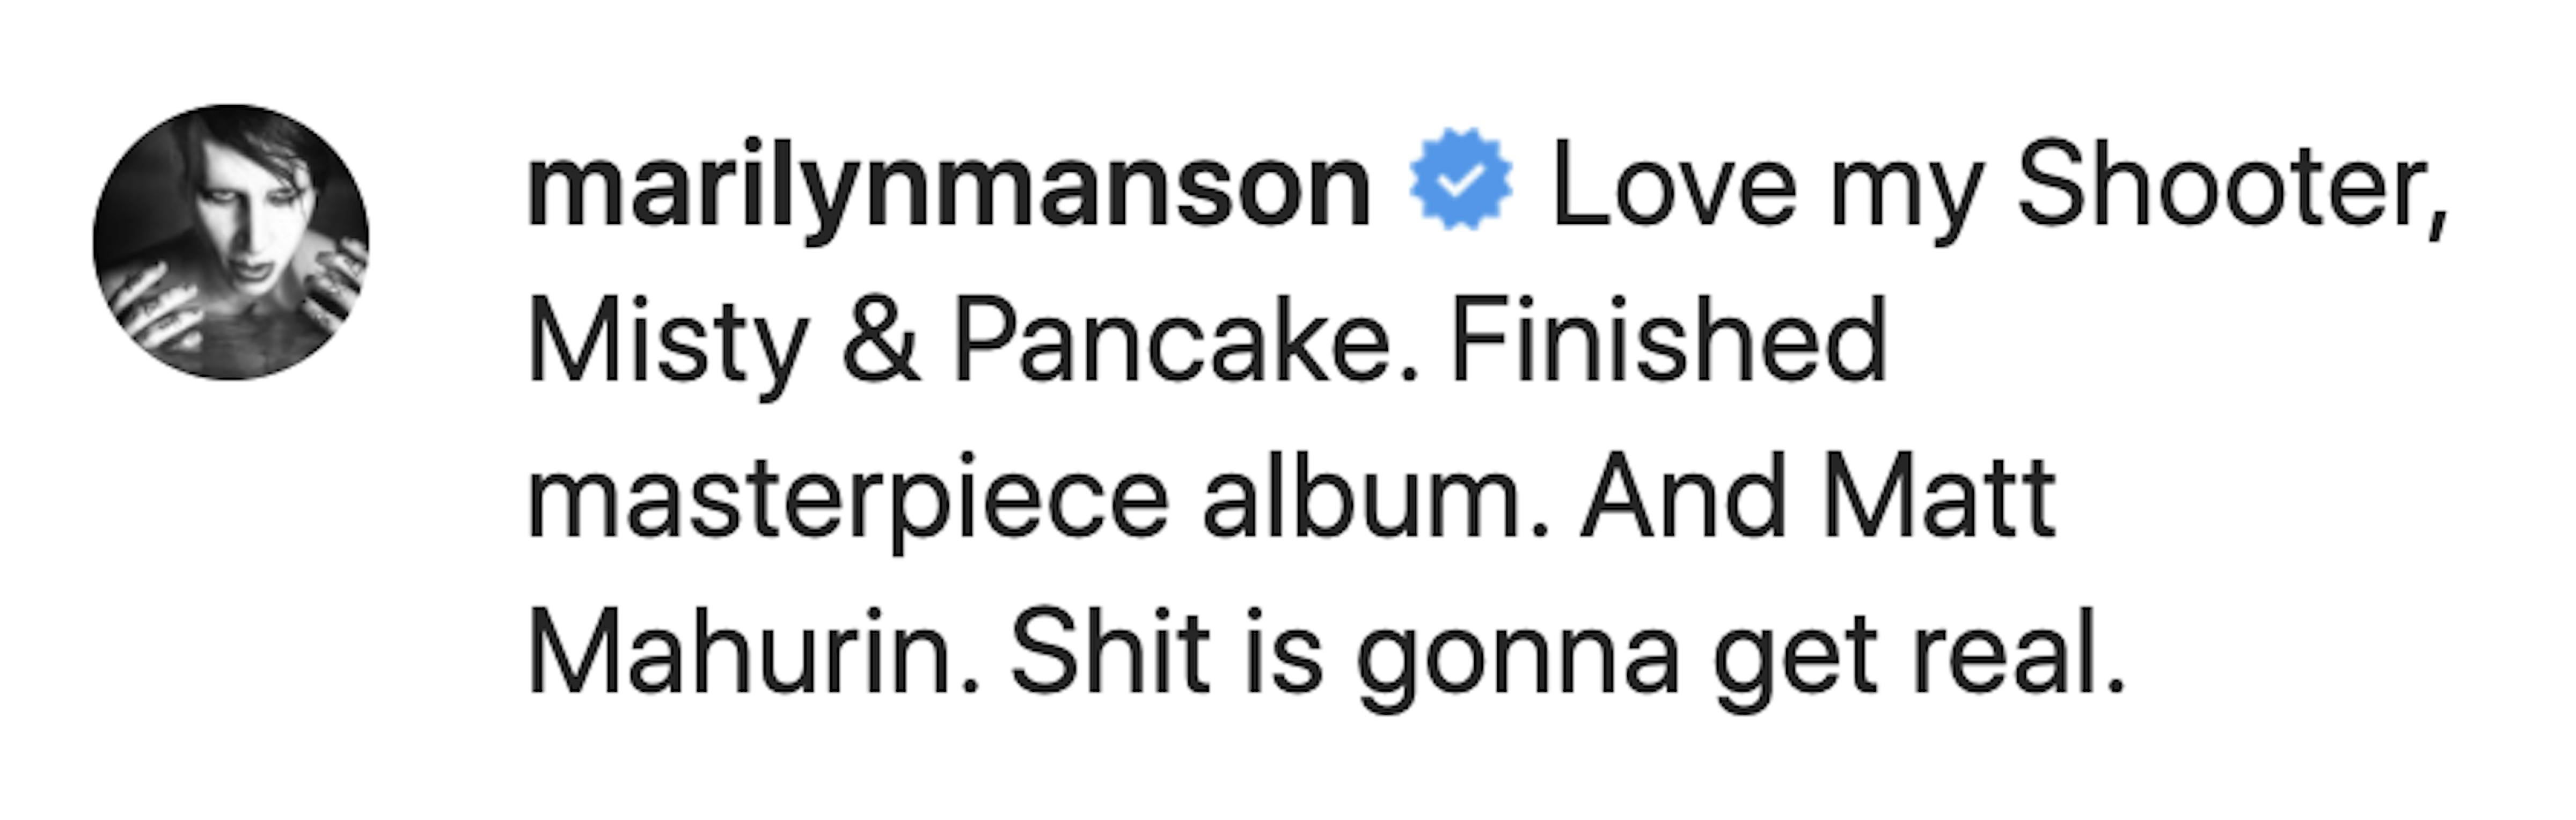 The New Marilyn Manson Album Is "Finished" And A "Masterpiece" — Kerrang!